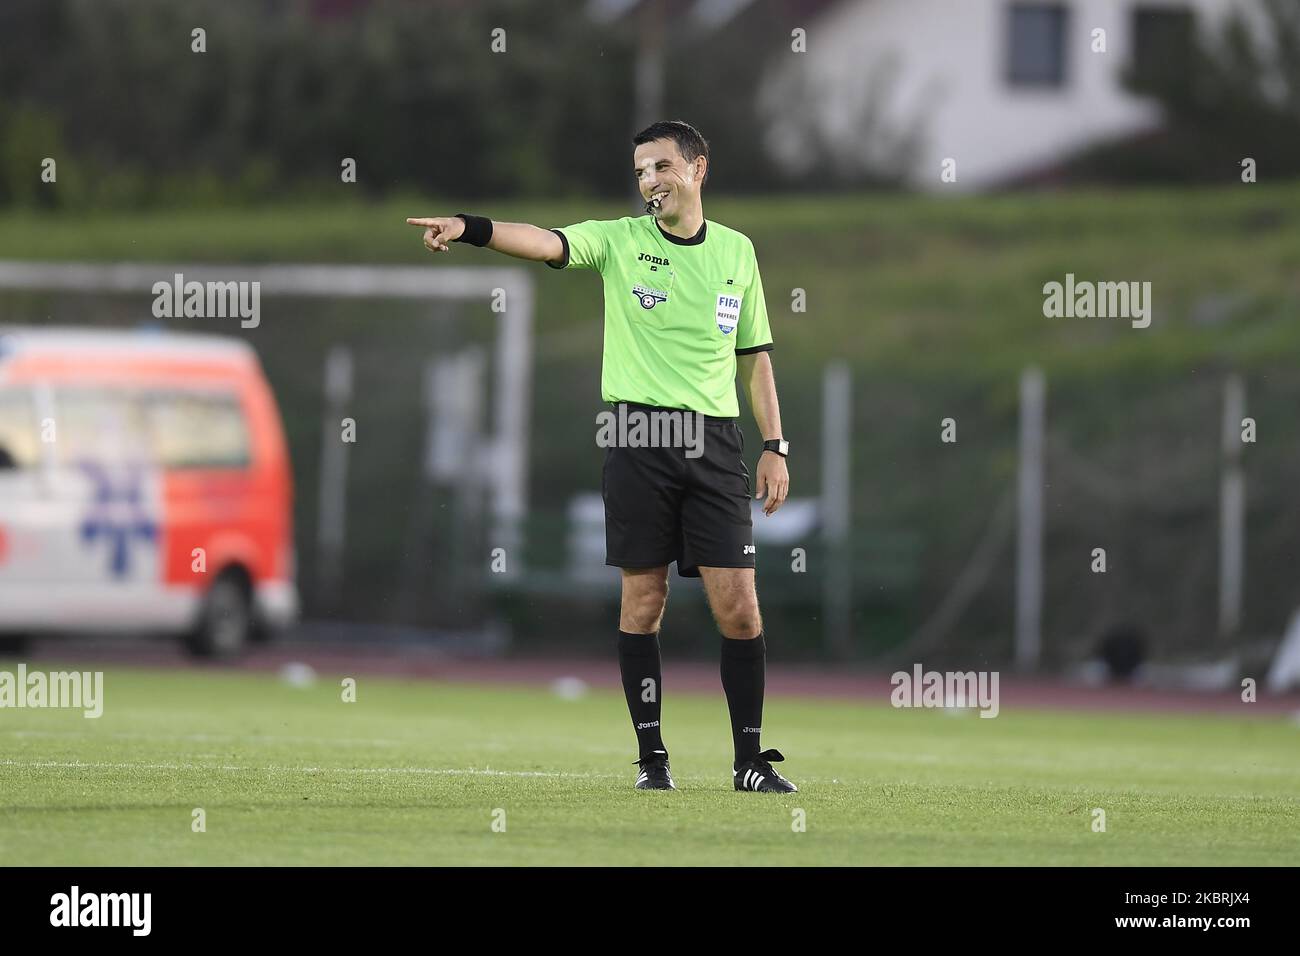 Cornel Cernea goalkeeper's coach of Sepsi OSK during semifinal of the  Romanian Cup edition 2019-20 between Sepsi Osk and Politehnica Iasi in  Sfantu Gheorghe, Romania, on June 24, 2020. (Photo by Alex